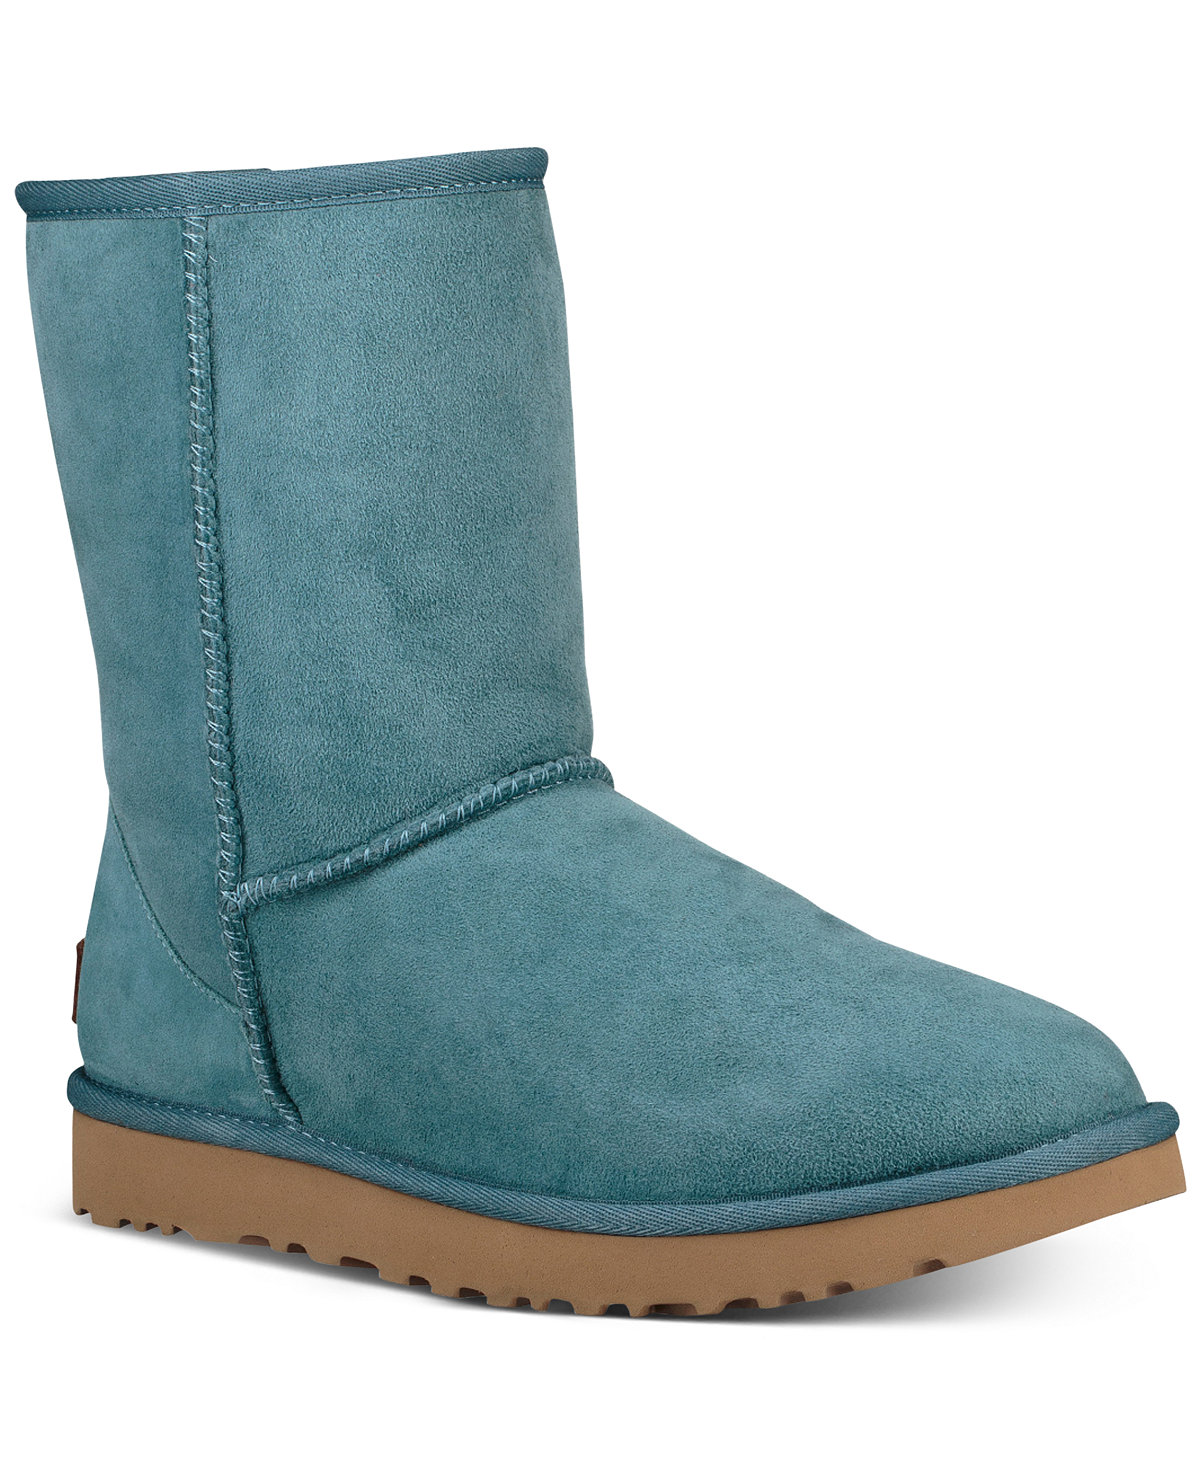 turquoise uggs with bows